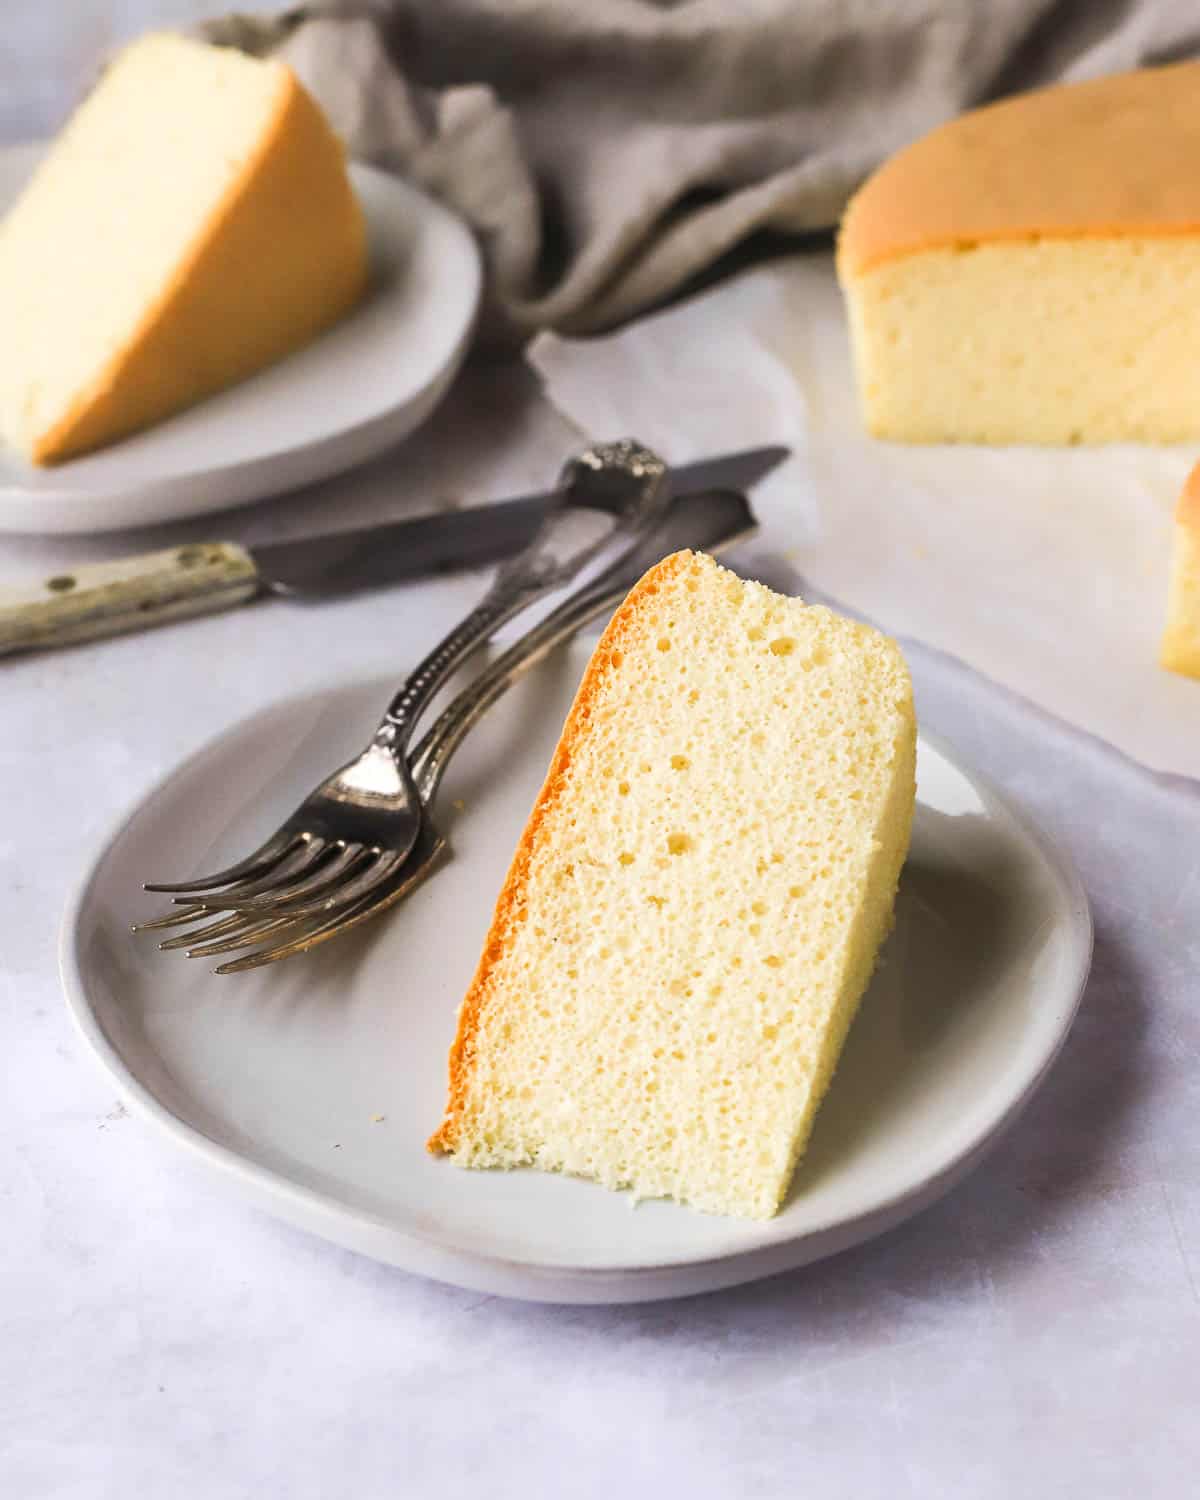 Japanese sponge cake - How to make the most cottony and bouncy cake